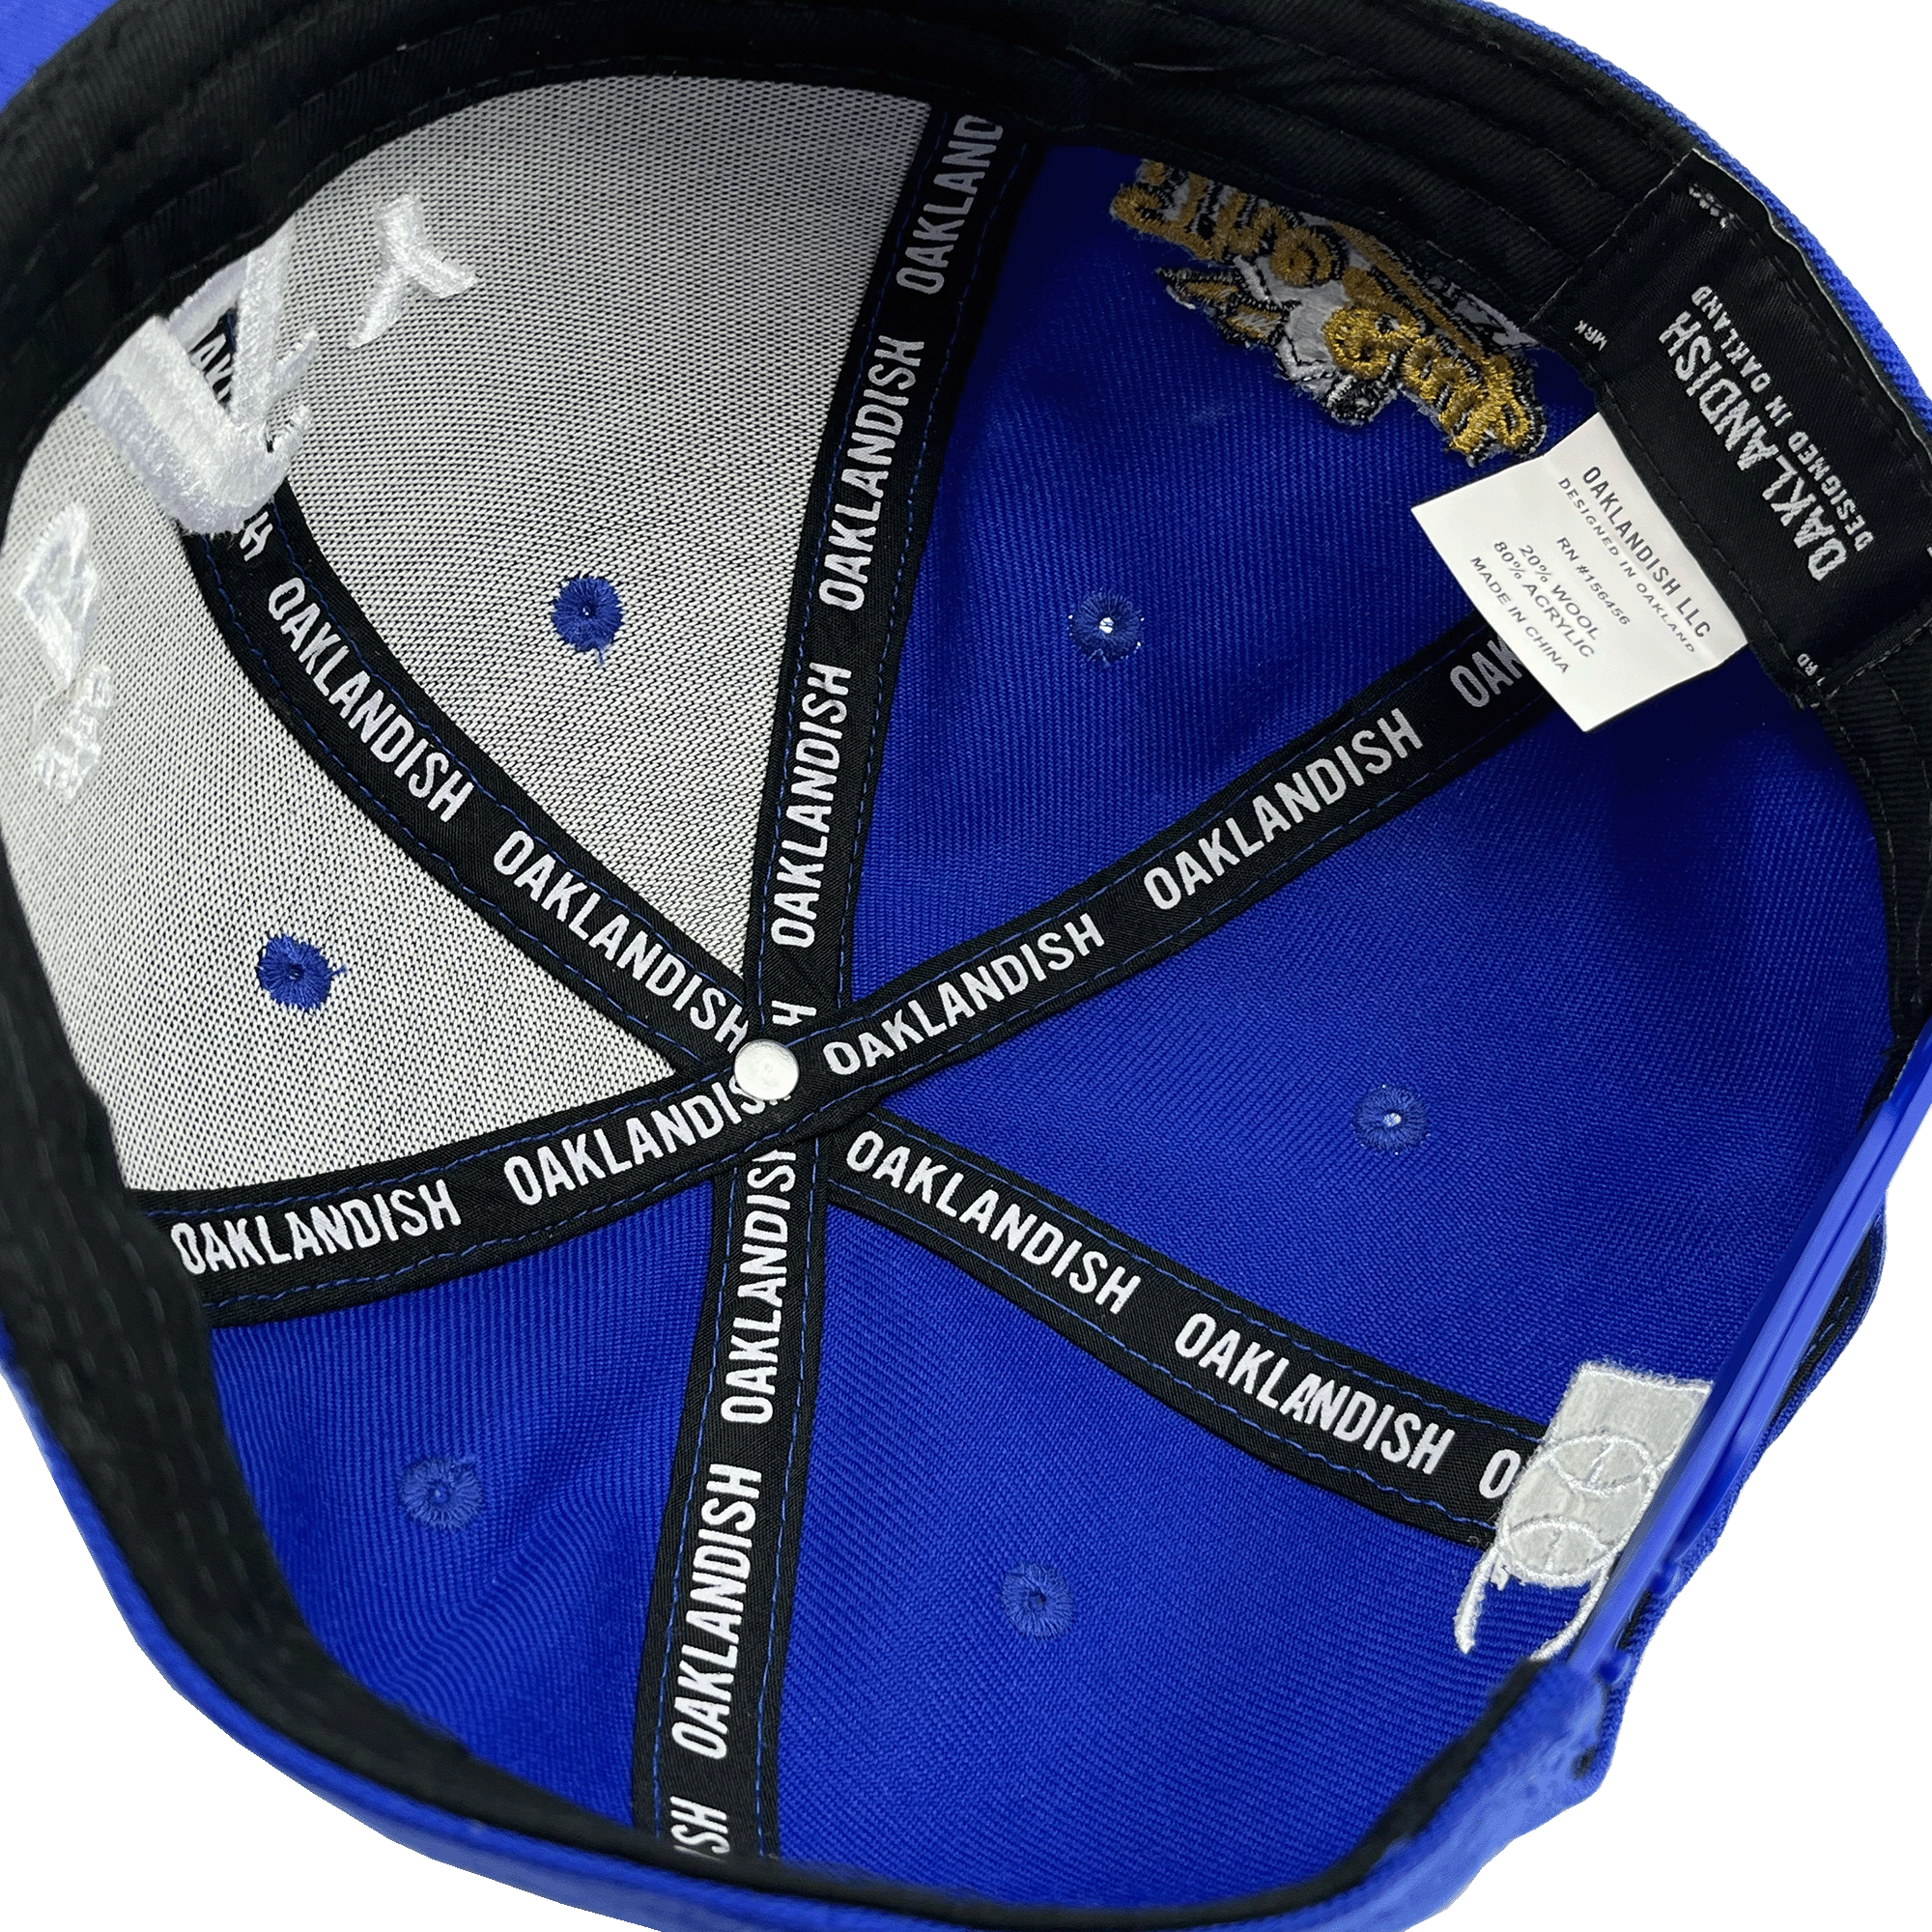 Inside crown view of black taping with Oaklandish wordmark on repeat inside a royal blue cap.